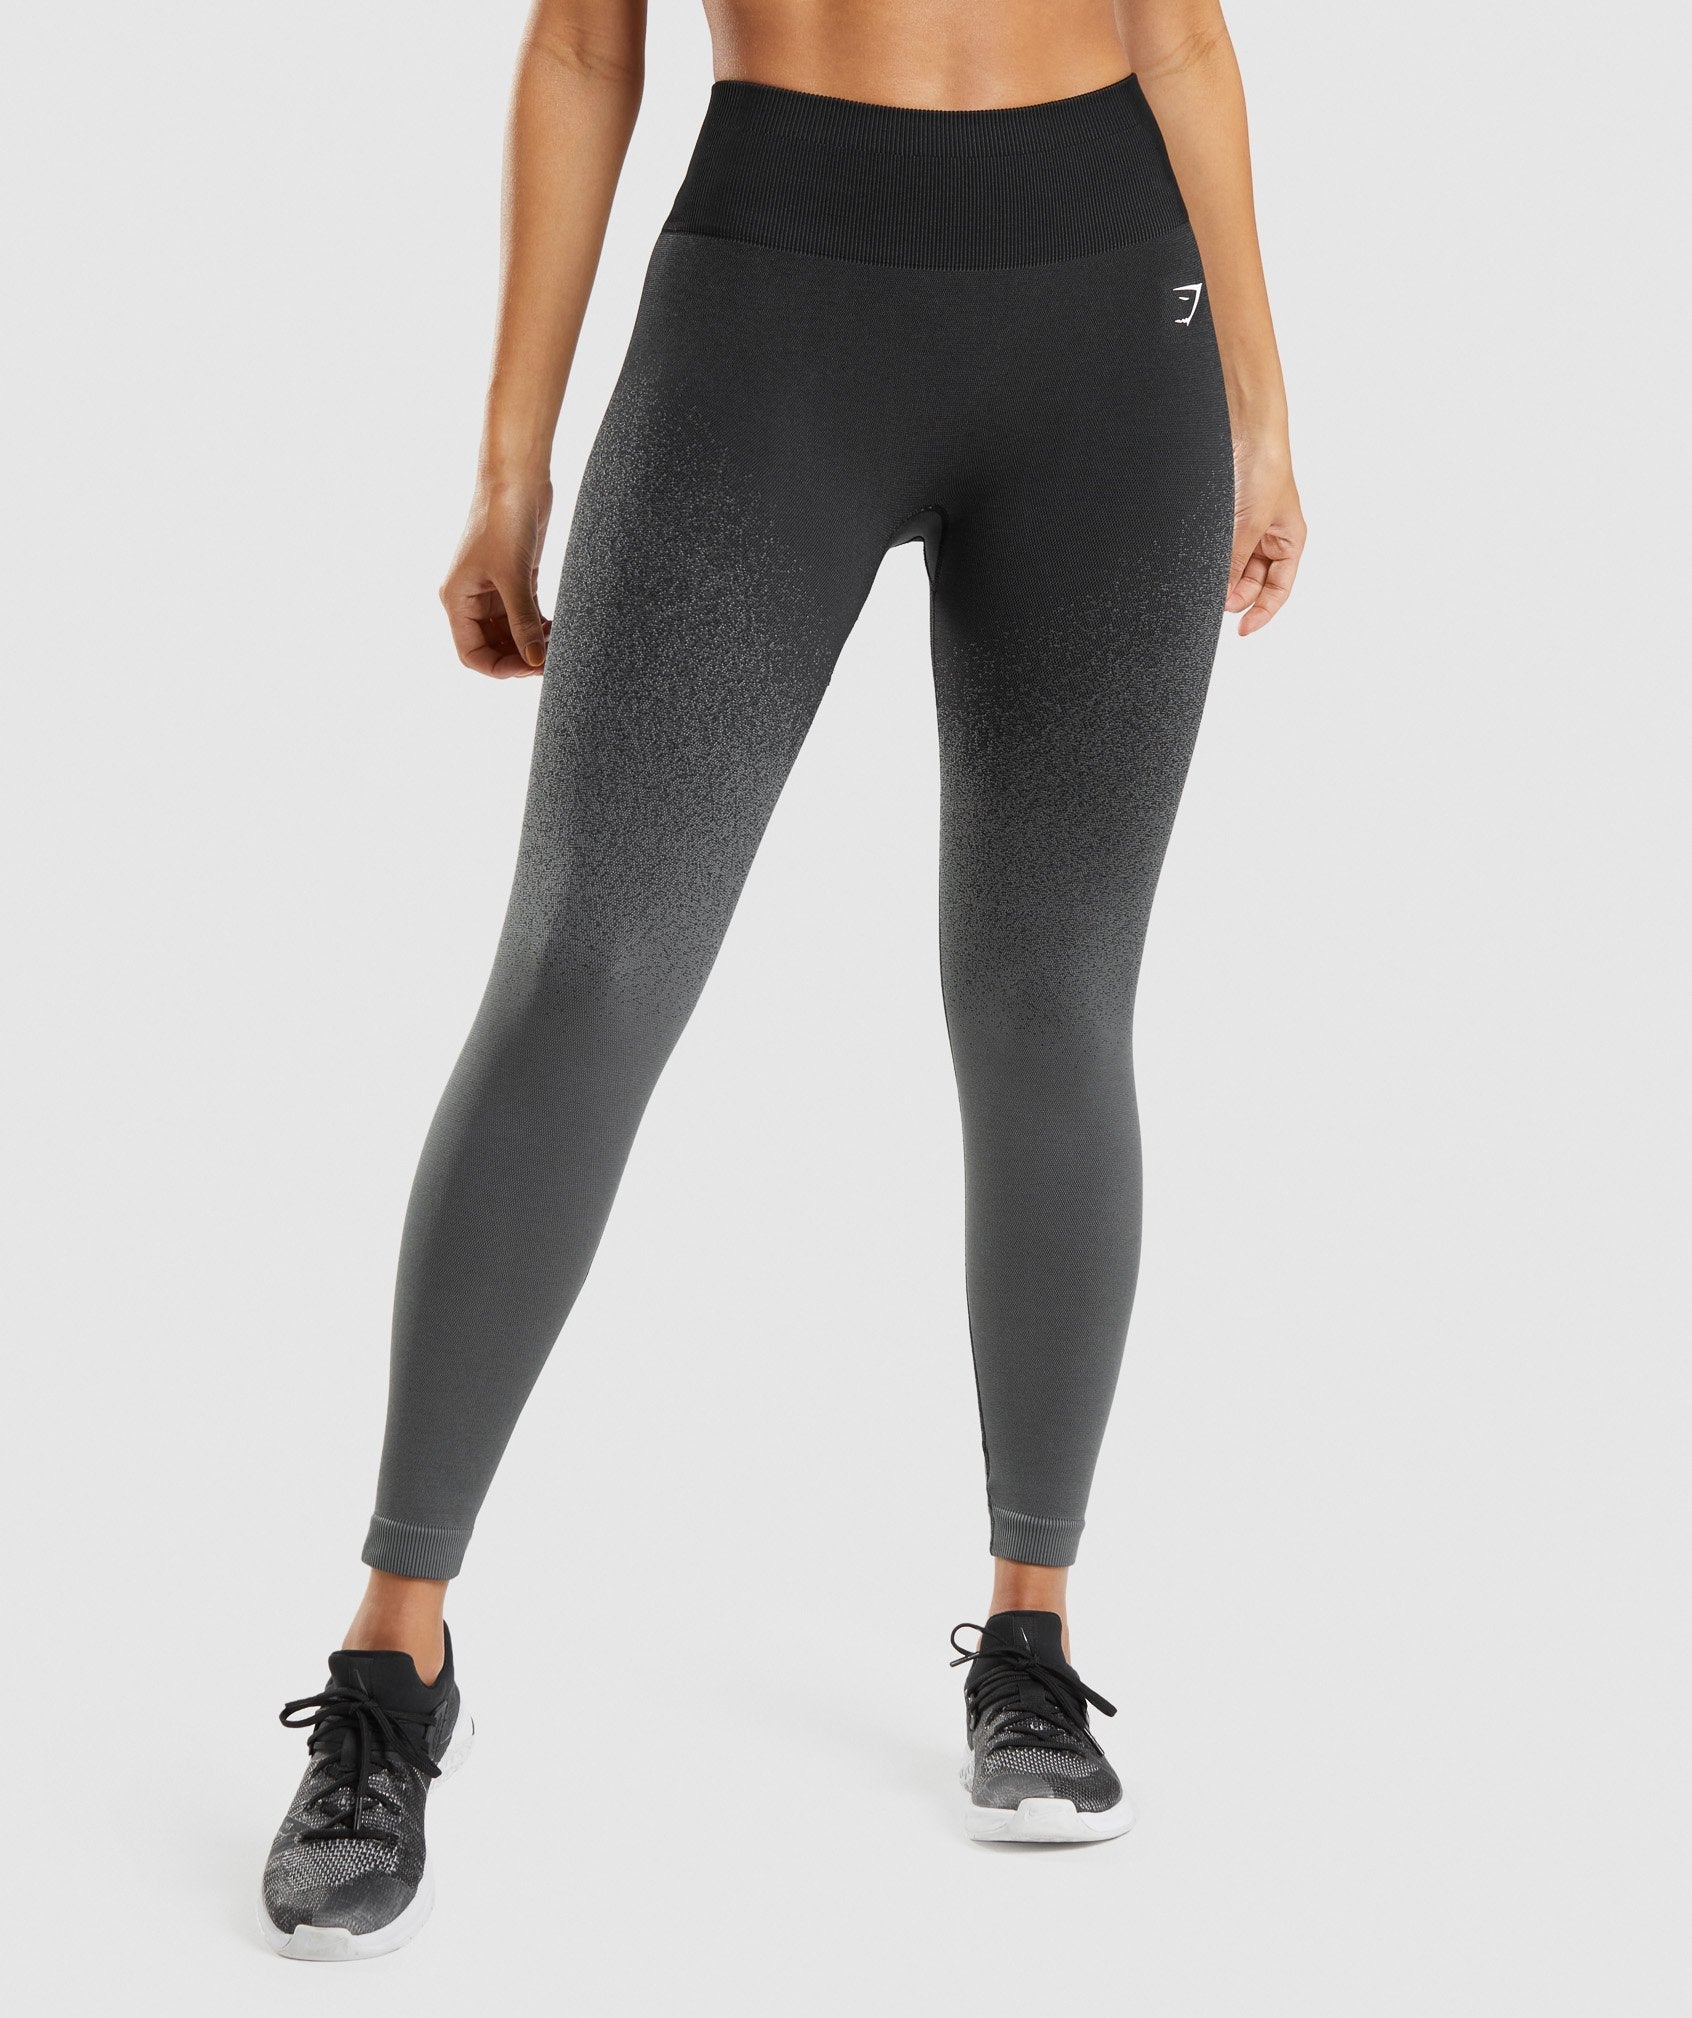 Gymshark Womens Adapt Marl Seamless workout Leggings Gray Size XS Gym  Athletic - $16 - From Amanda